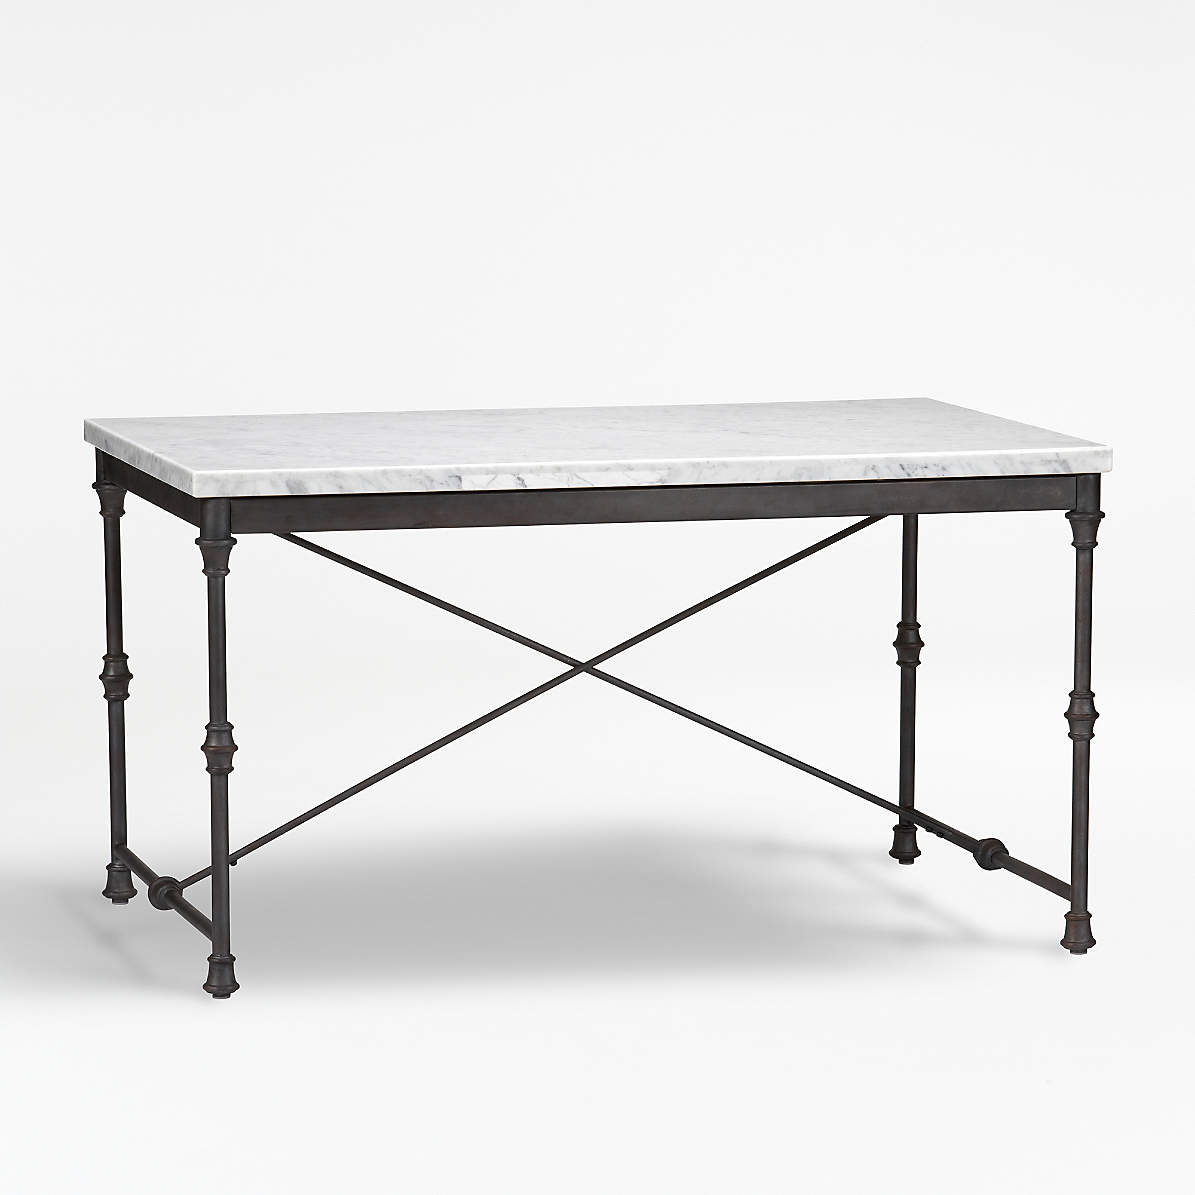 French Kitchen Table + Reviews   Crate & Barrel